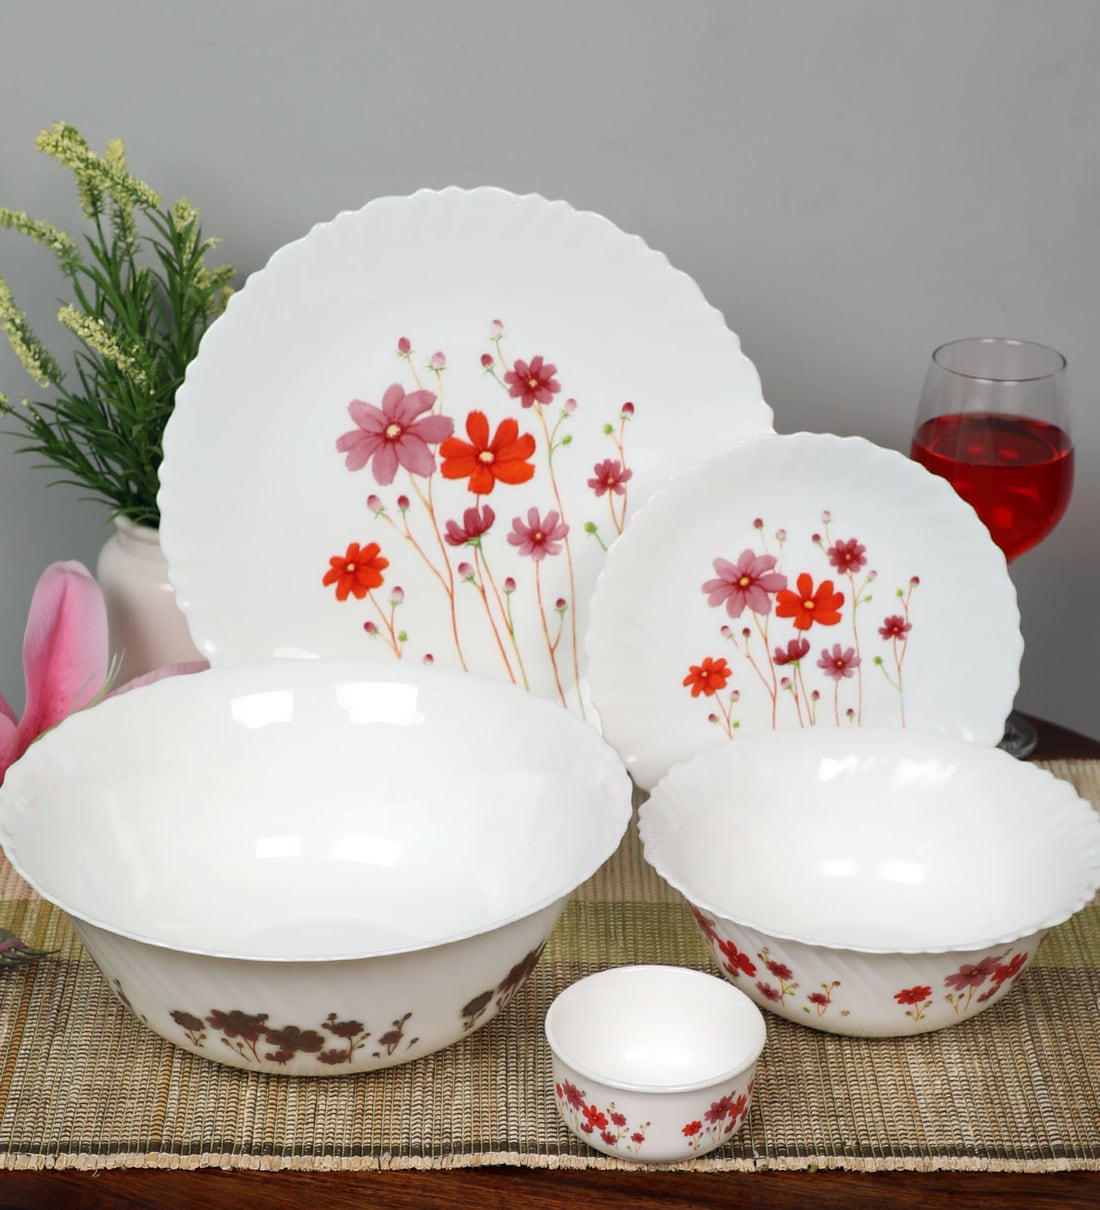 Buy Feston Floral Opal ware Dinner Set- Set of 20 Pcs by Luminarc Online -  Opalware Dinner Sets - Opalware Dinner Sets - Discontinued - Pepperfry  Product